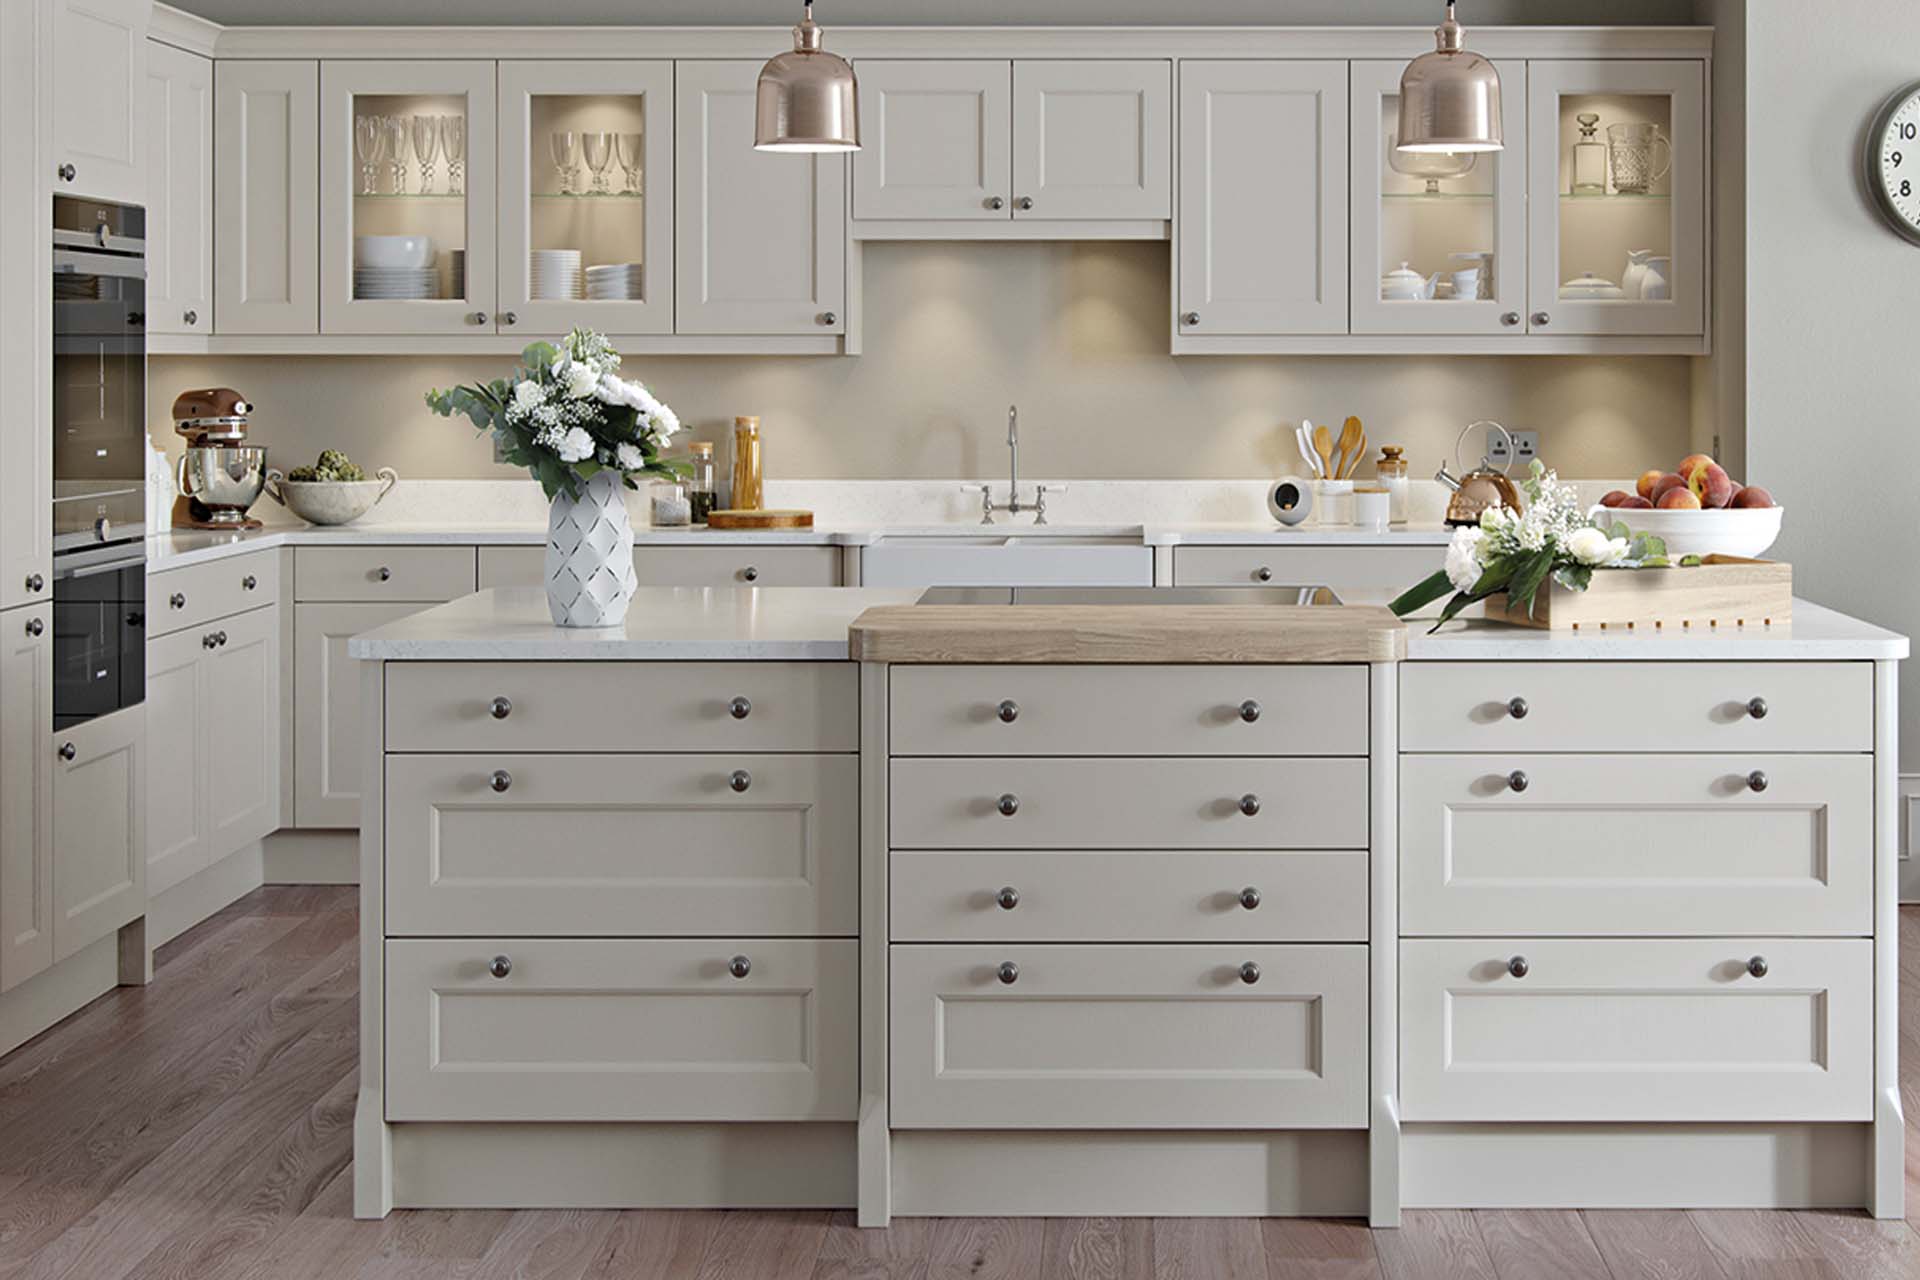 Burbidge Kitchens from Purple Kitchens Maghull, Liverpool, Formby ...